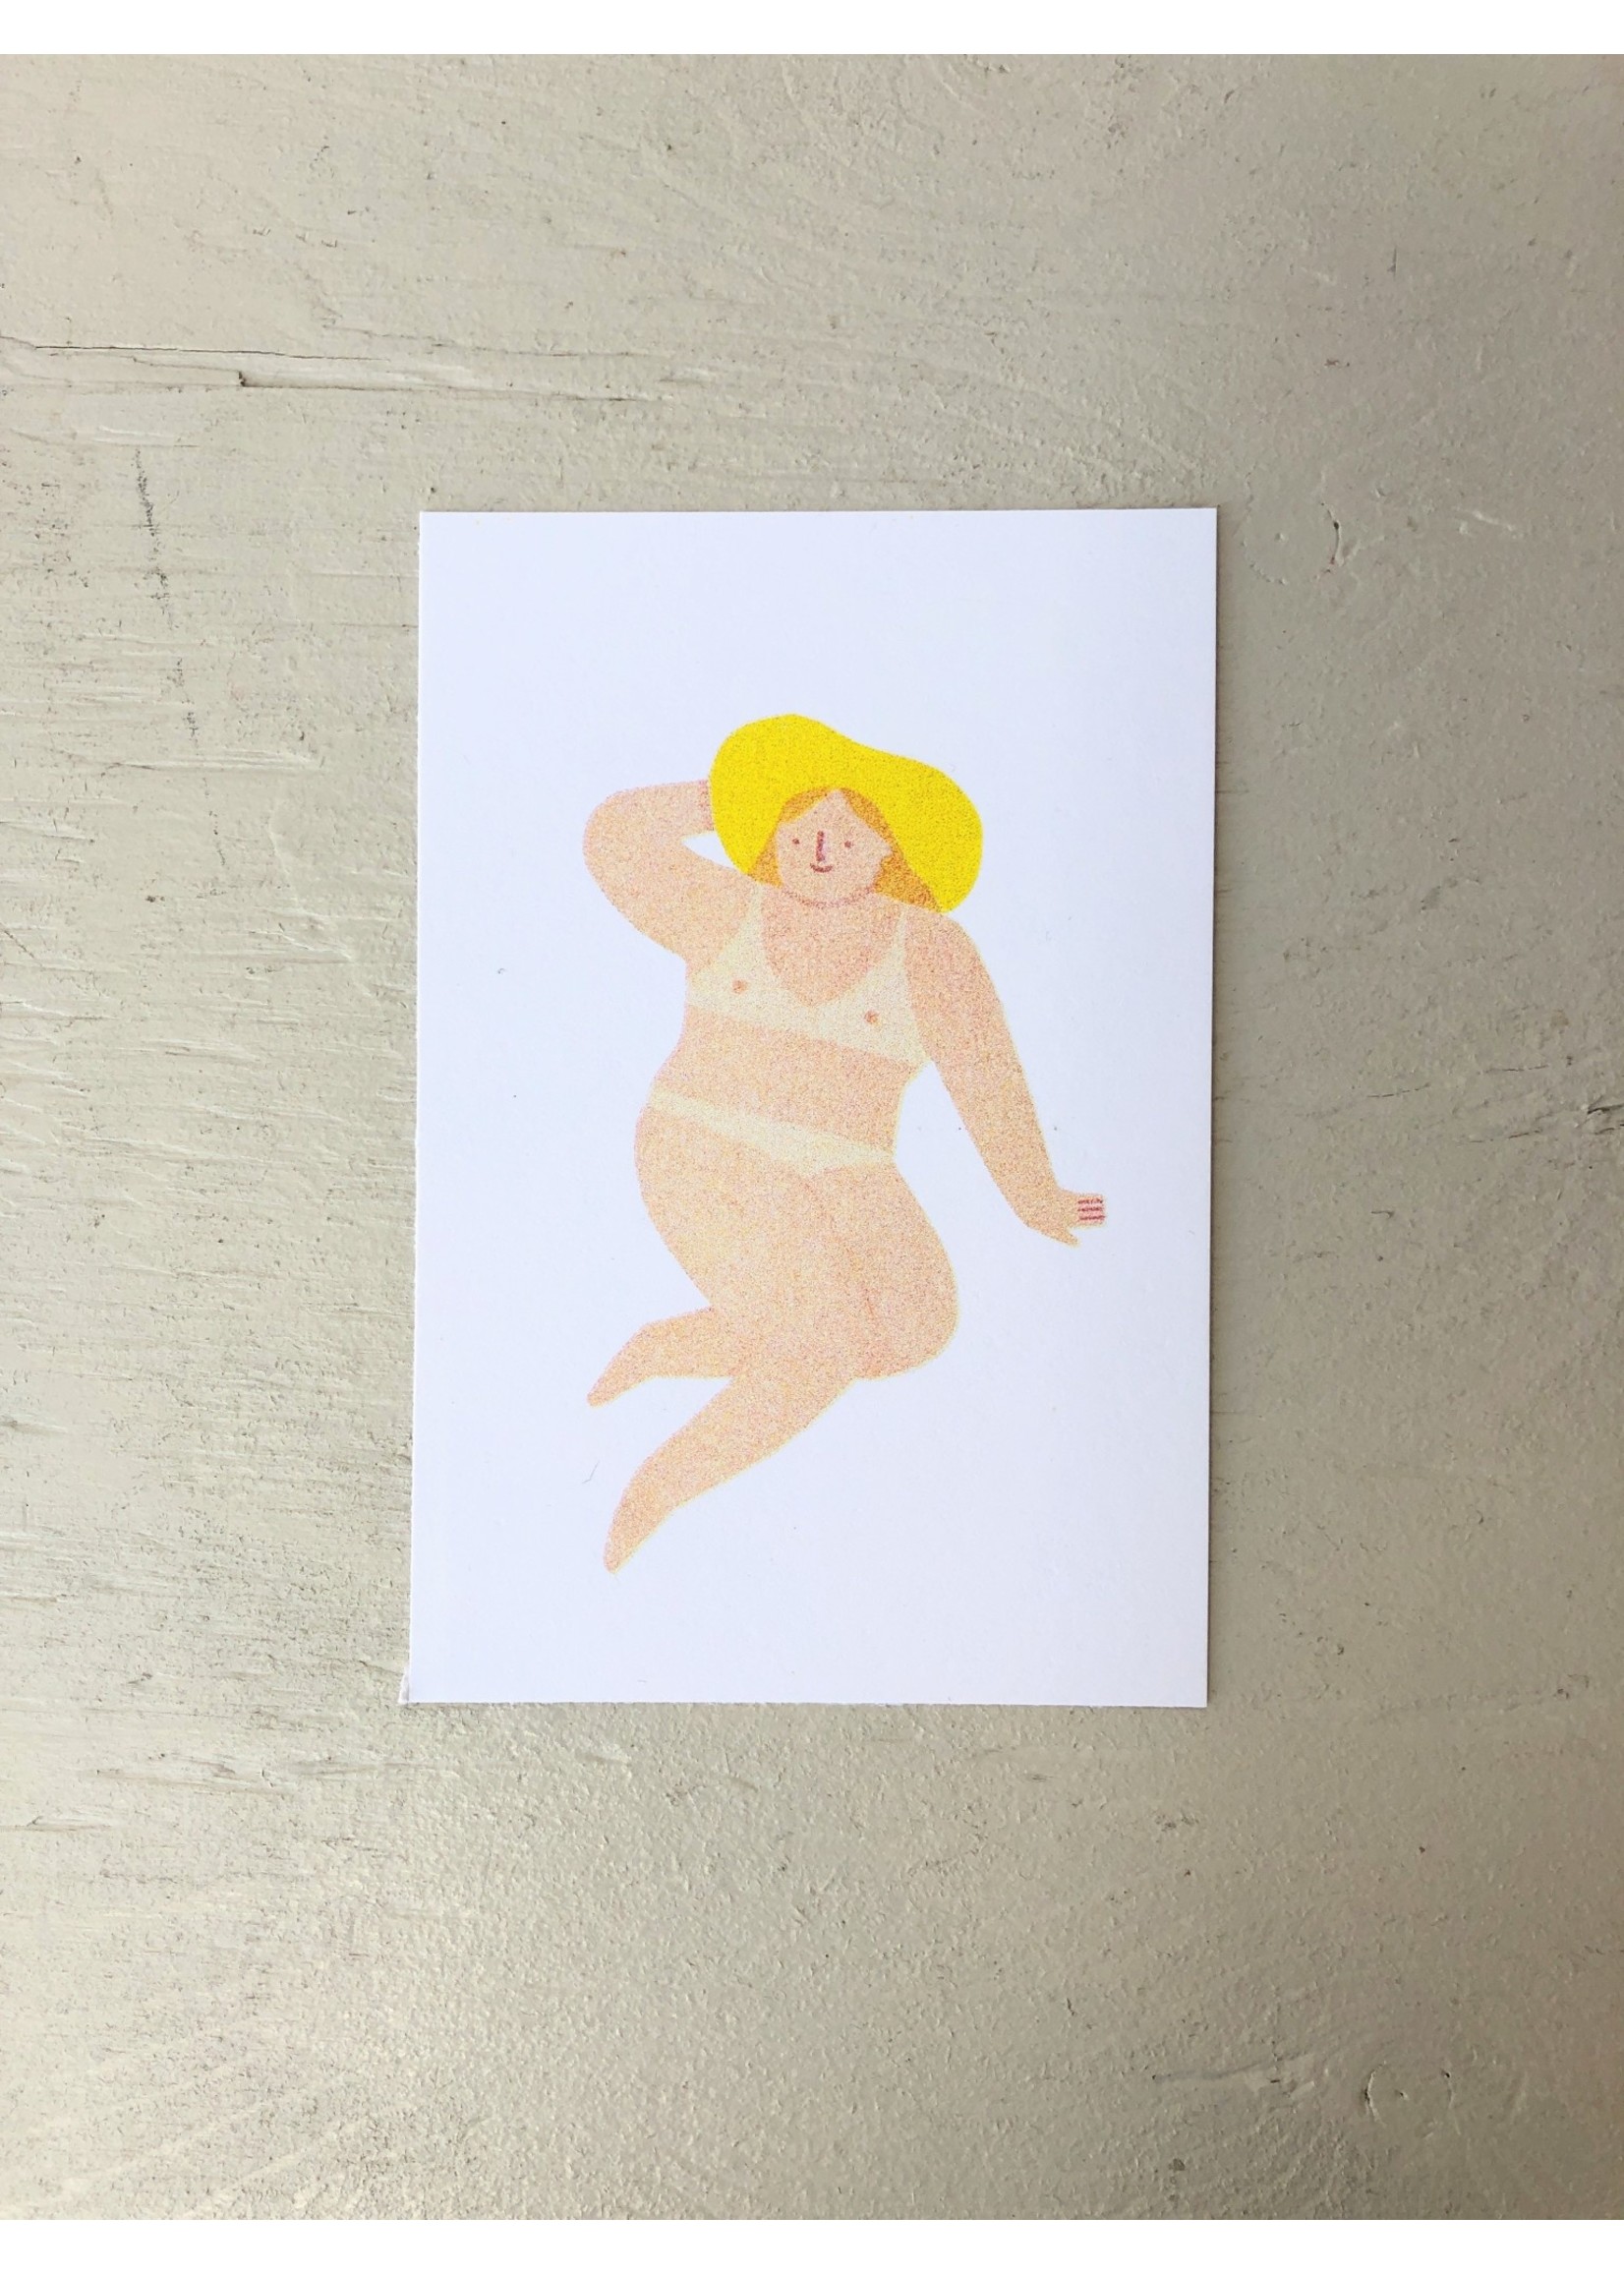 Stay Home Club Sunbathers Risopgraph Prints by Stay Home Club, 4" x 6"